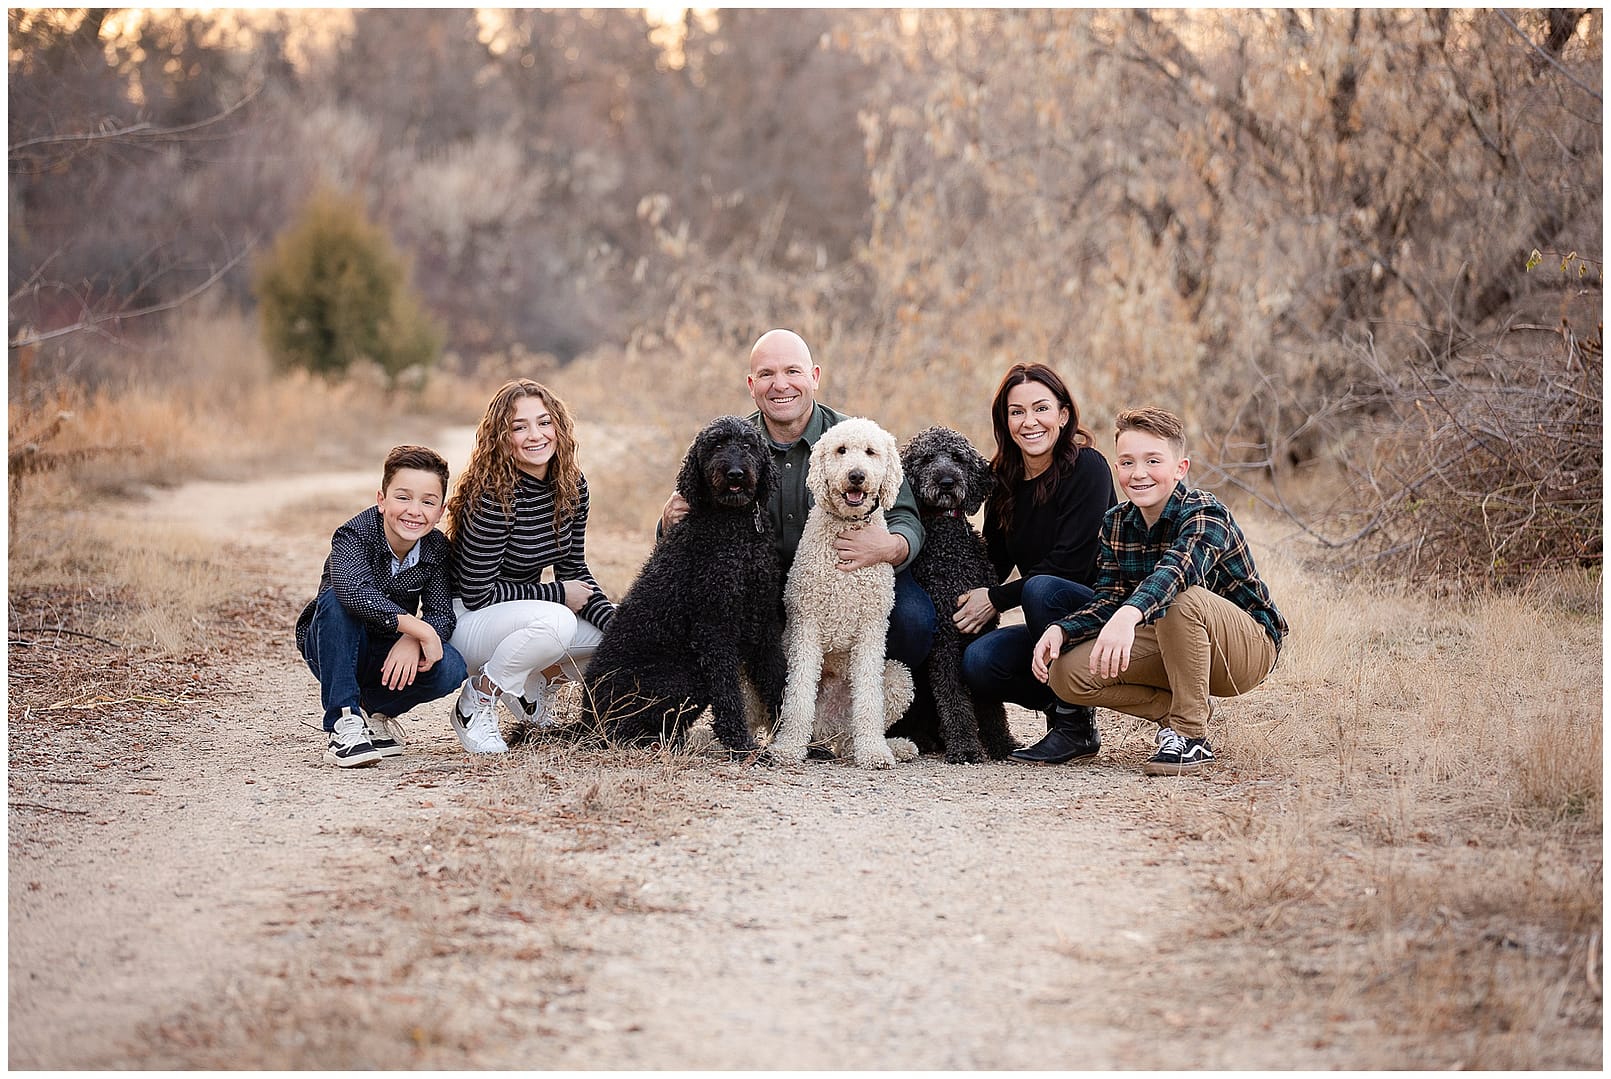 Outdoor family session with pets in Boise, ID. Photos by Tiffany Hix Photography.